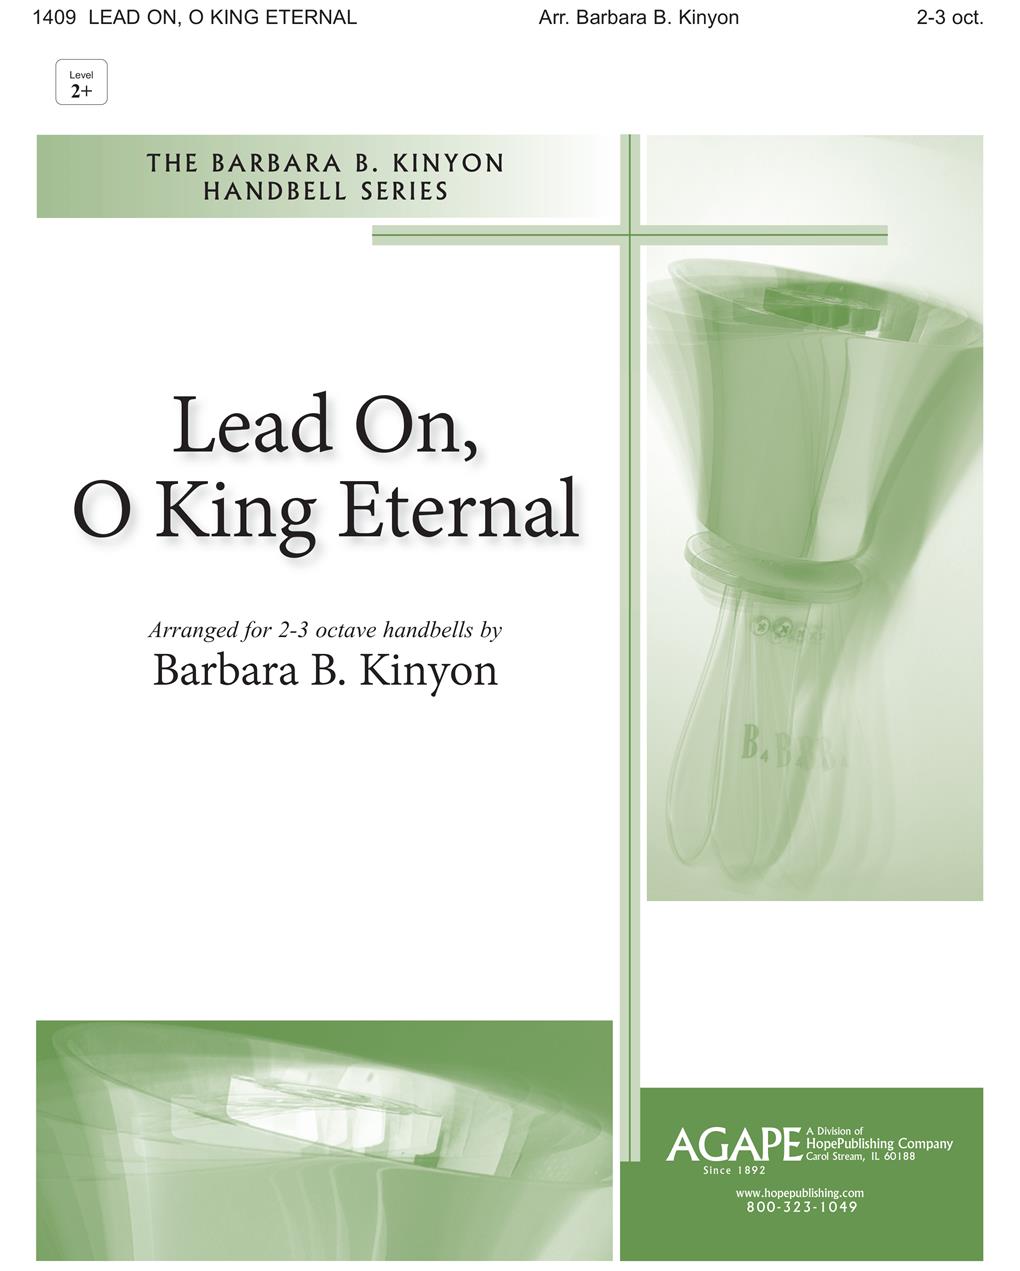 Lead On O King Eternal - 2-3 Octave Cover Image